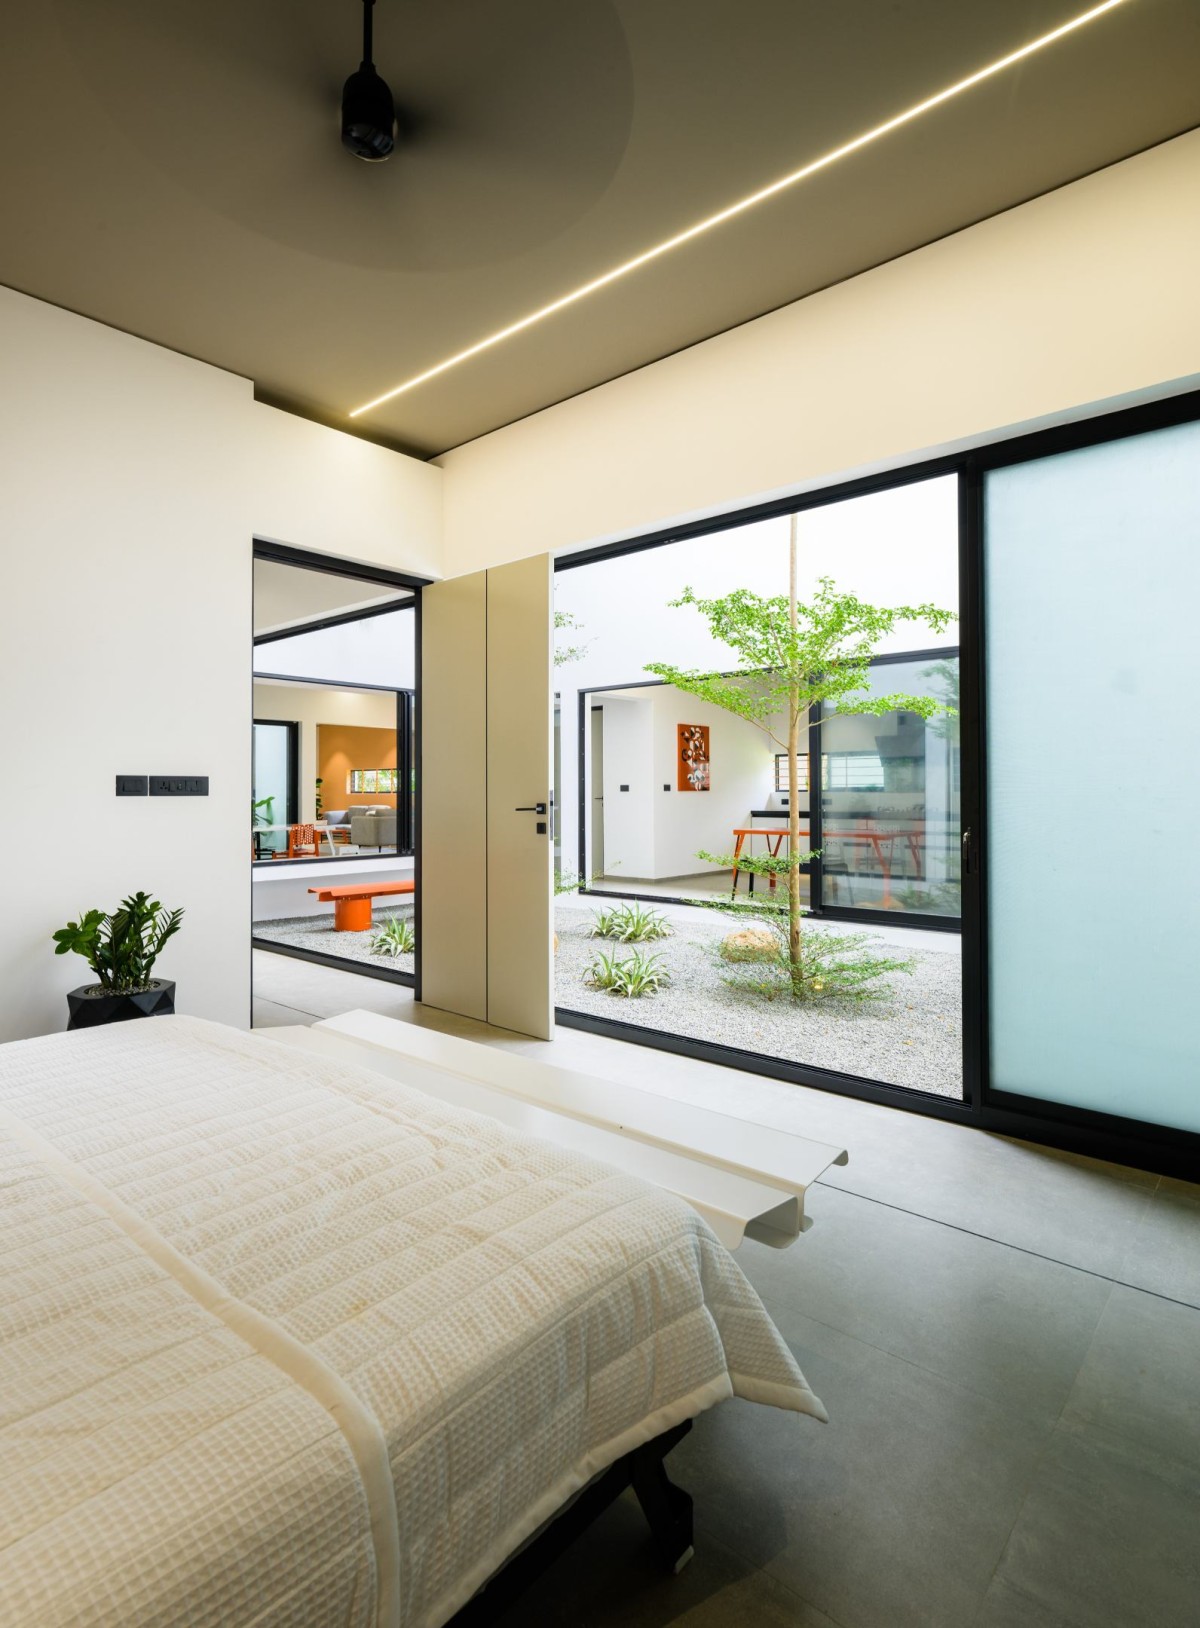 Bedroom 1 of The Colour Burst House by LIJO.RENY.architects